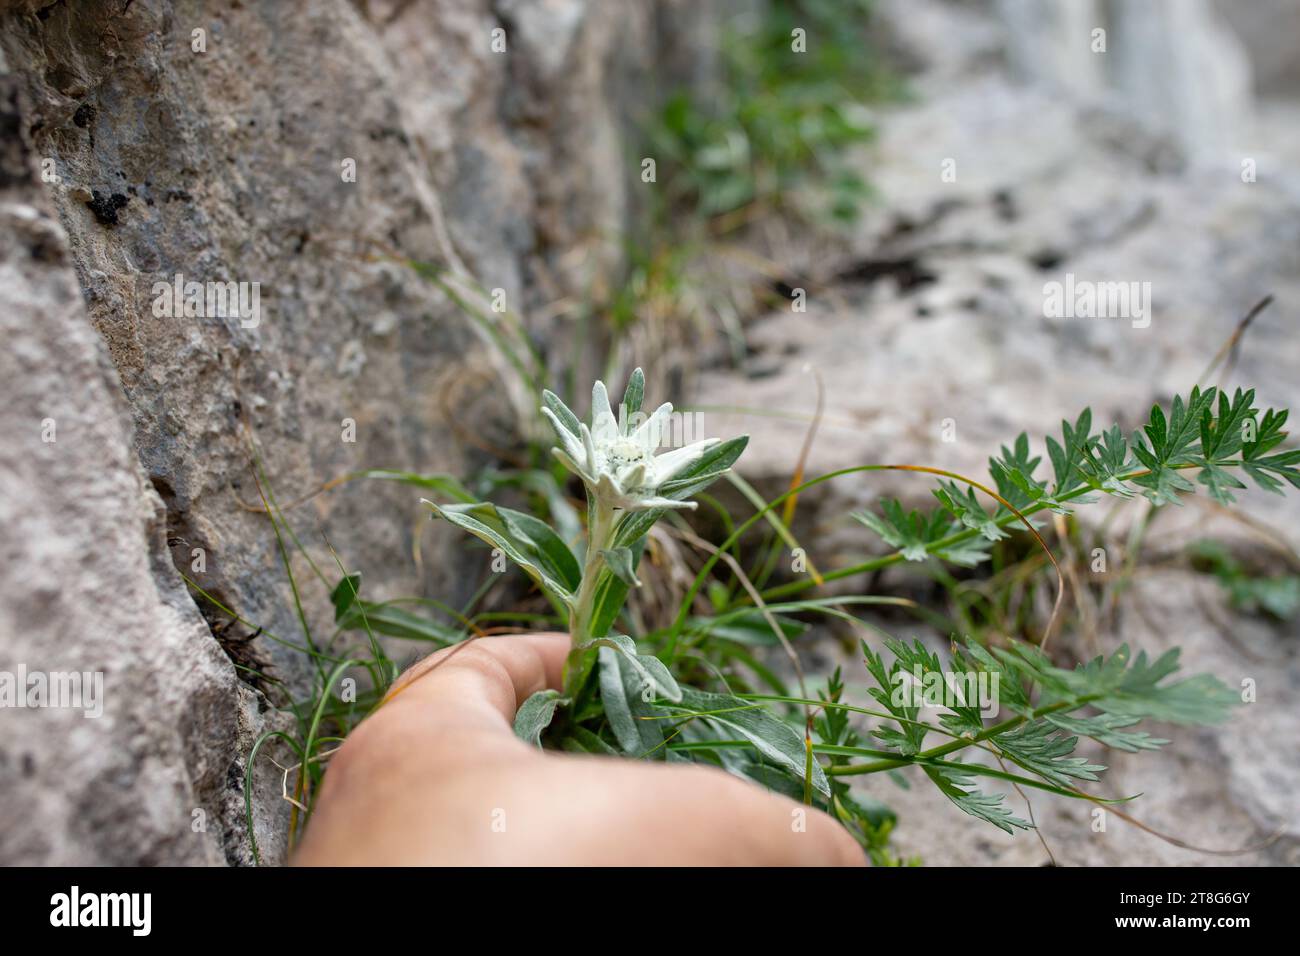 Hand reaching for a very rare edelweiss mountain flower.   (Leontopodium alpinum) growing in natural environment high up in the rocky mountains, soft Stock Photo